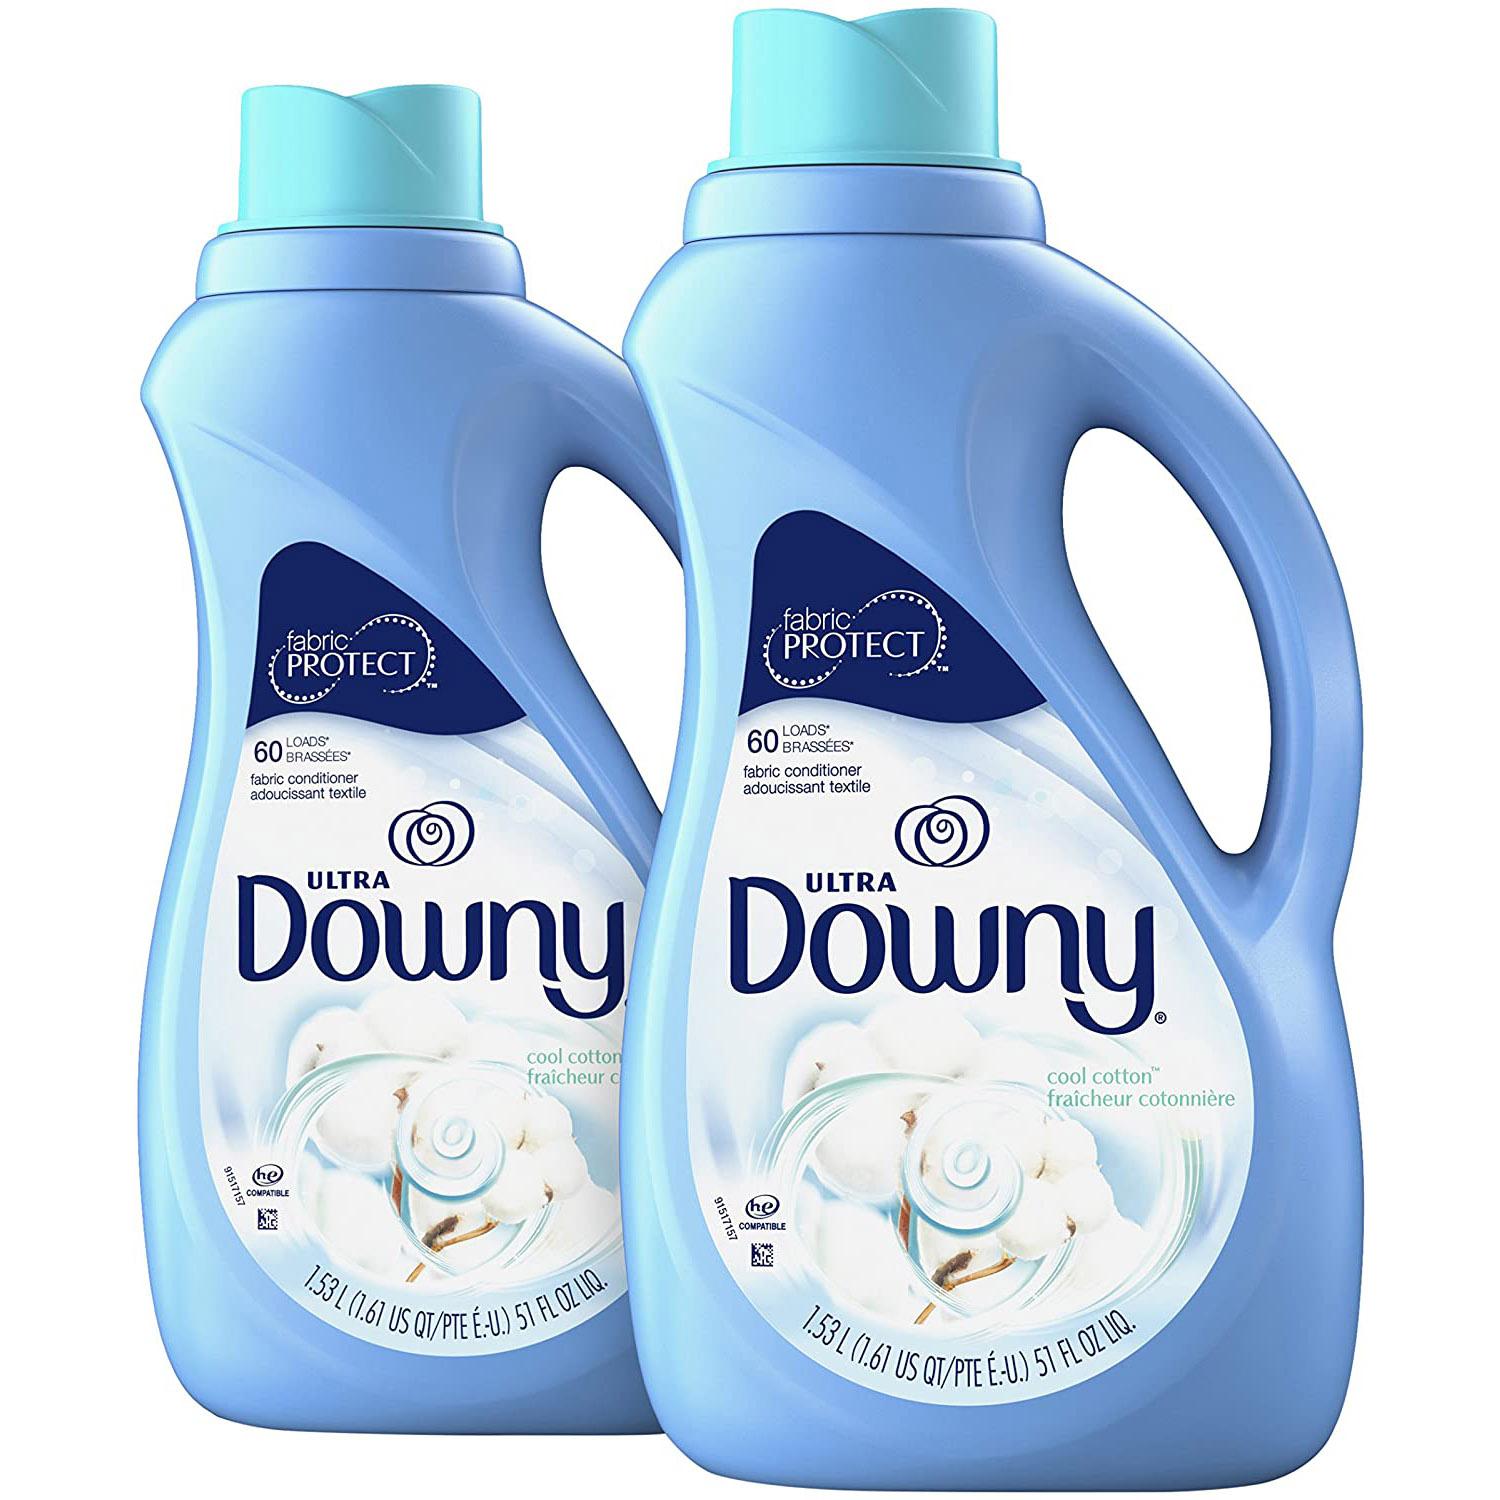 2 Downy Ultra Liquid Fabric Conditioner for $6.98 Shipped